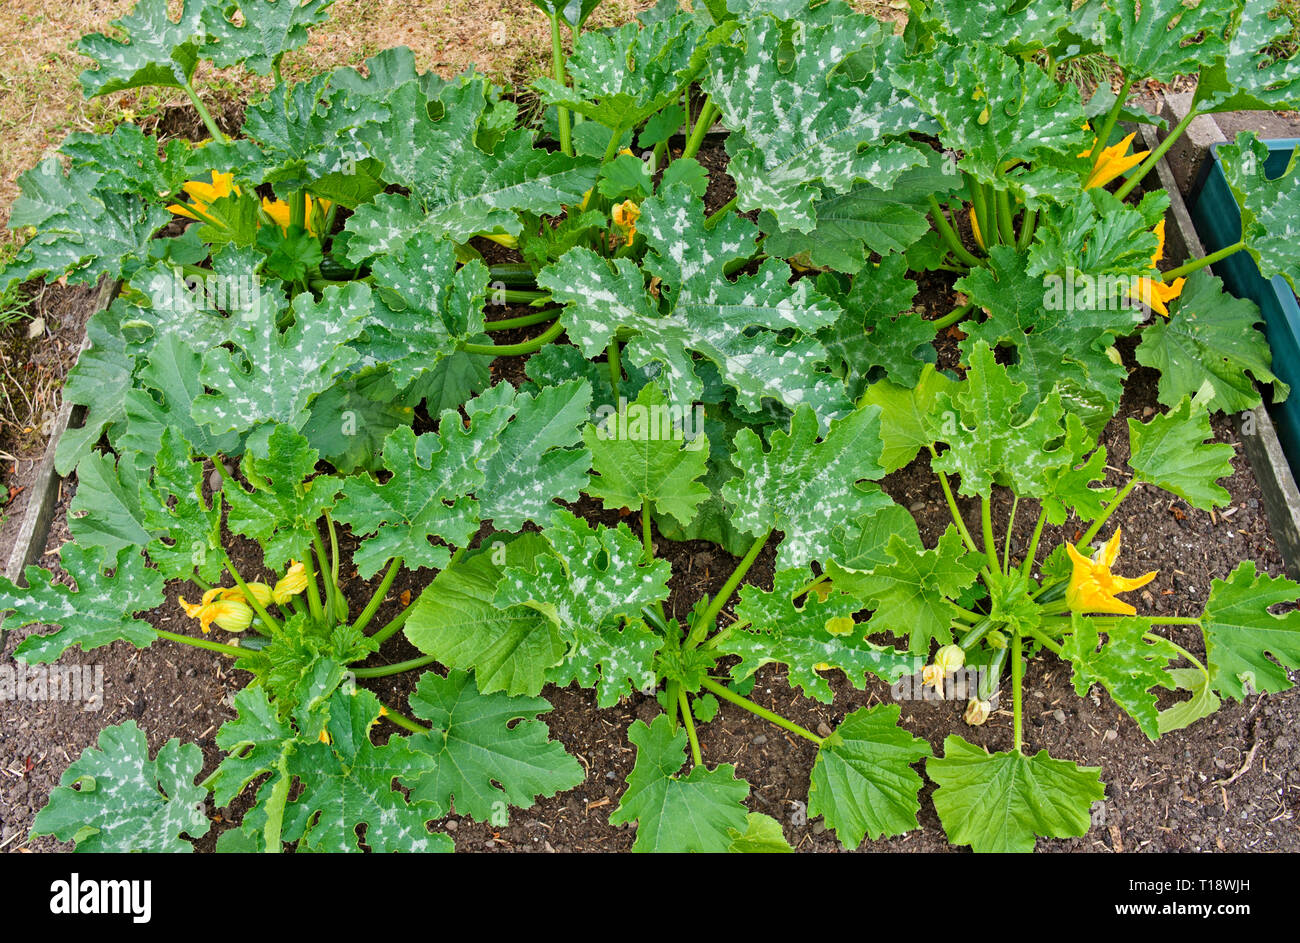 Young courgette plants variety F1 Defender growing in raised bed in English vegetable garden, coming into flower with first small courgettes summer UK Stock Photo